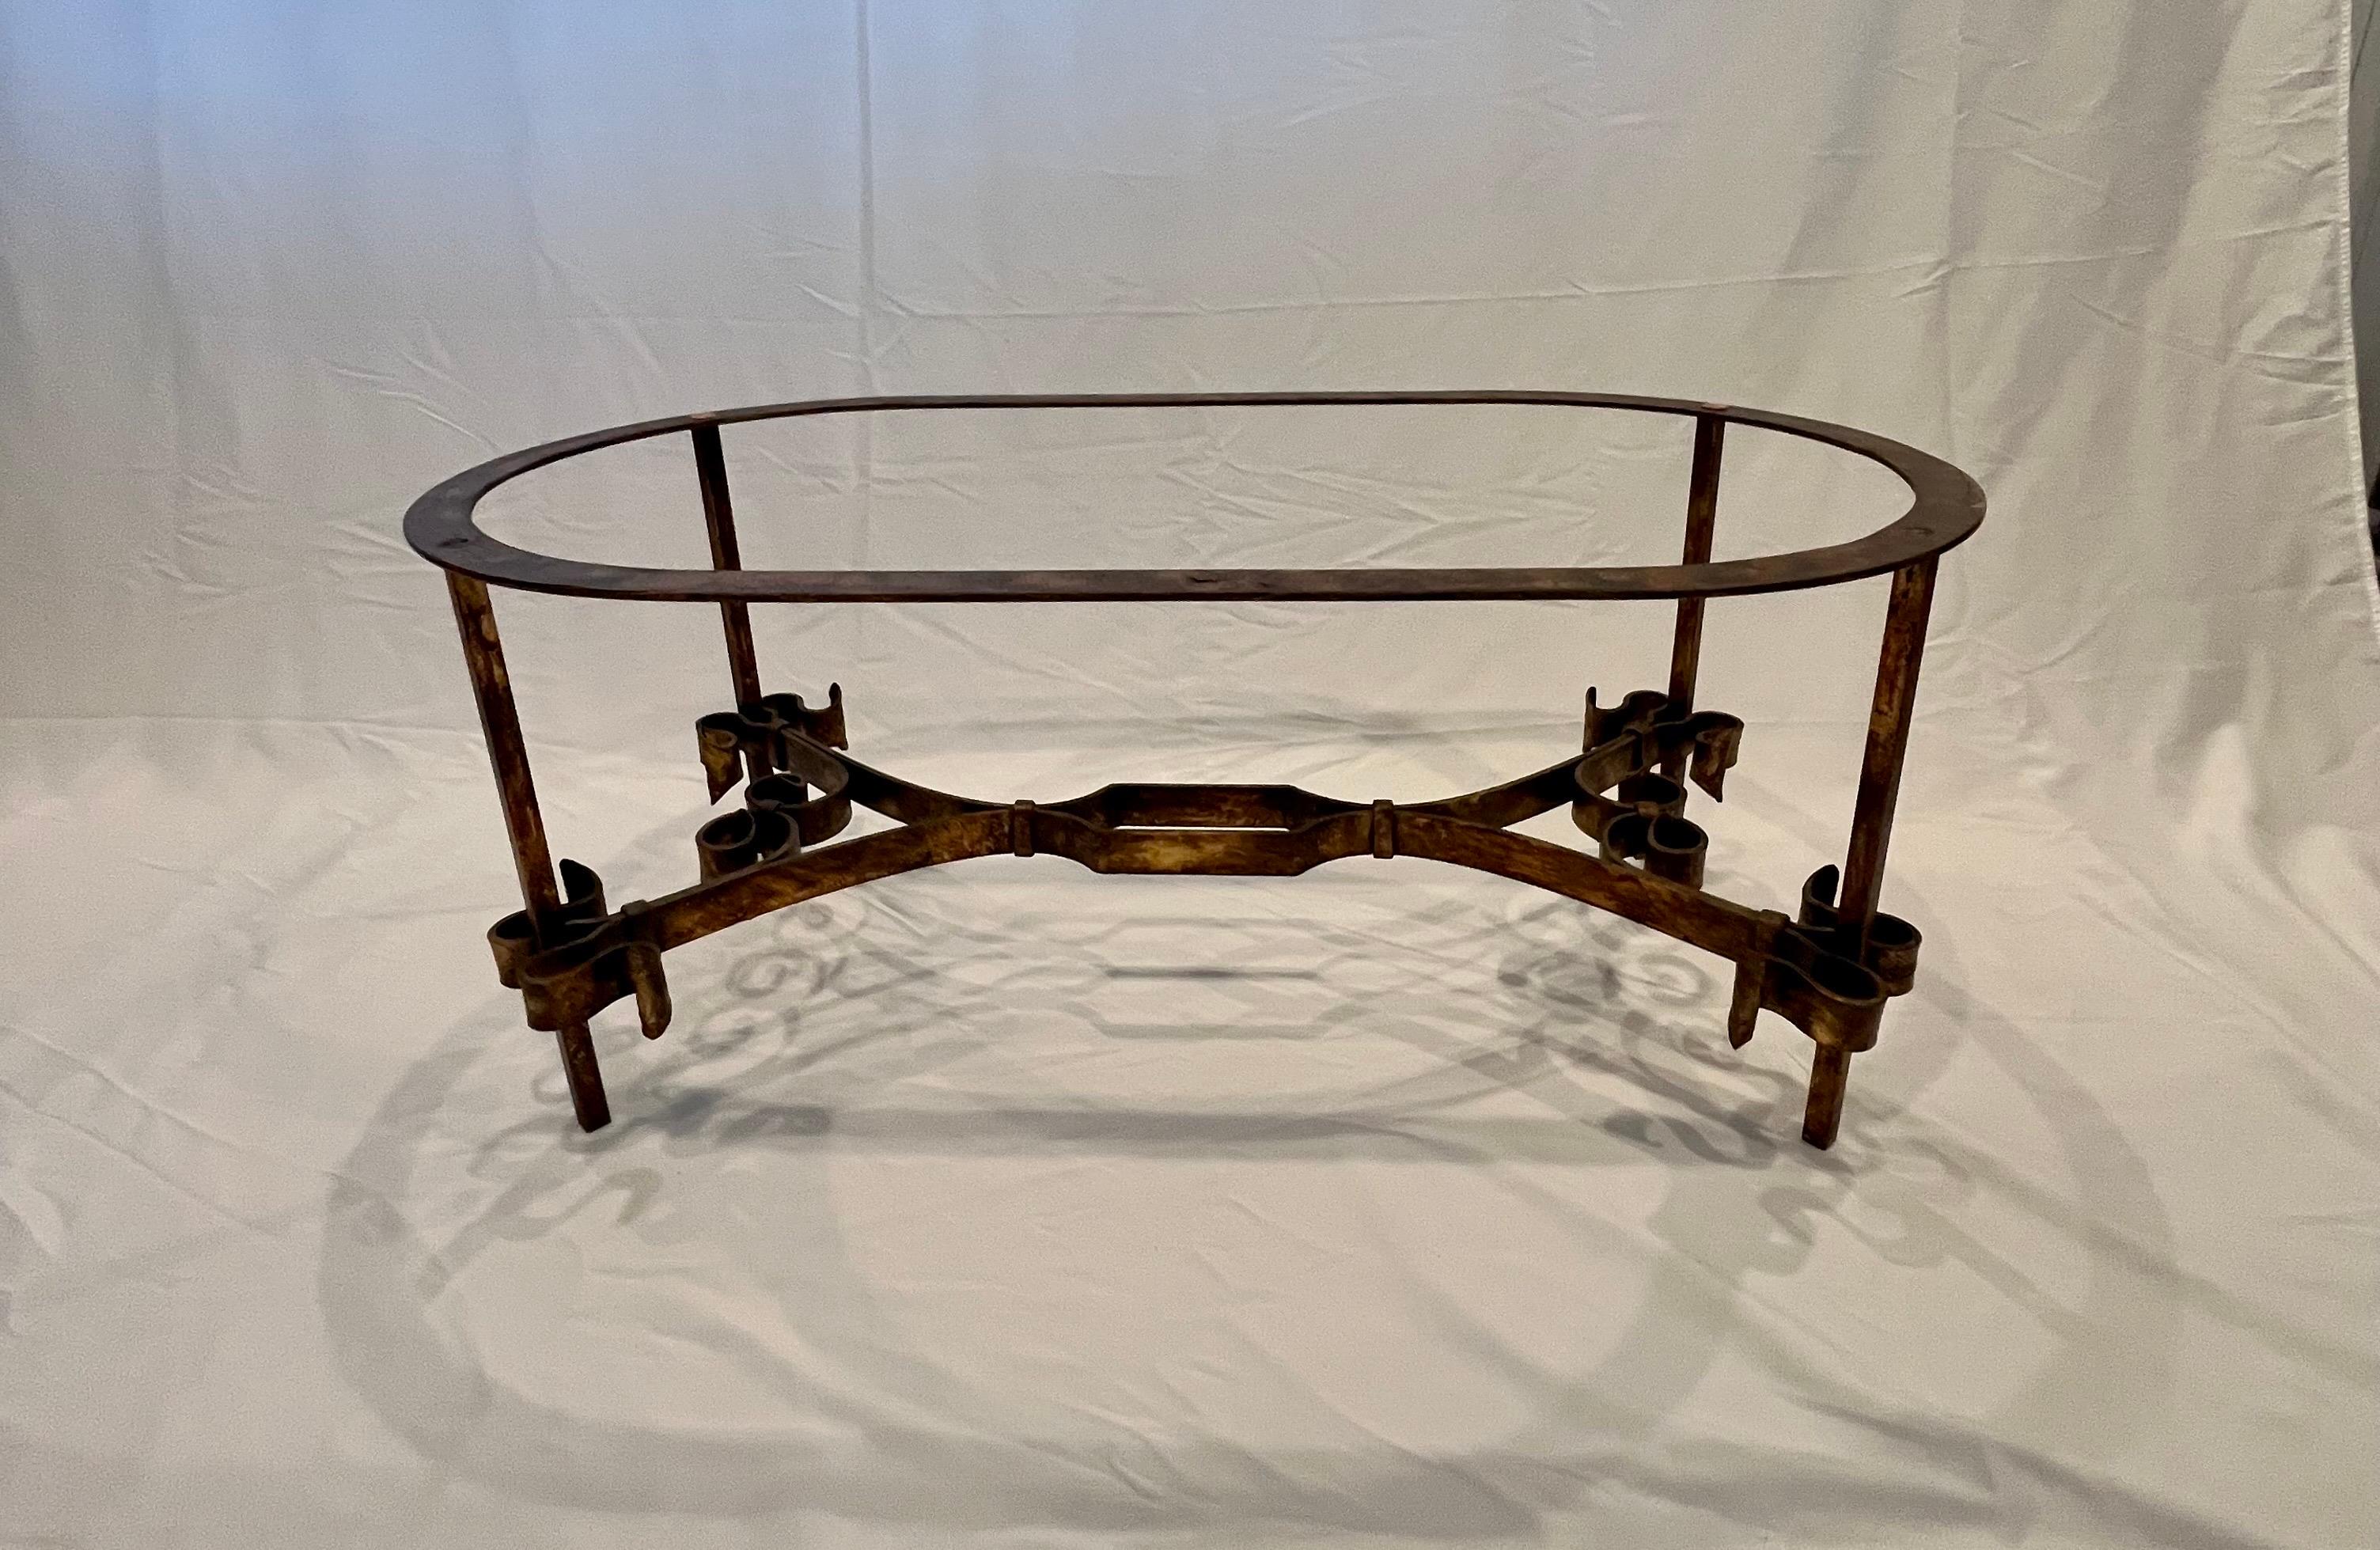 Great quality vintage Hollywood Regency/Brutalist coffee table. Features a substantial .75